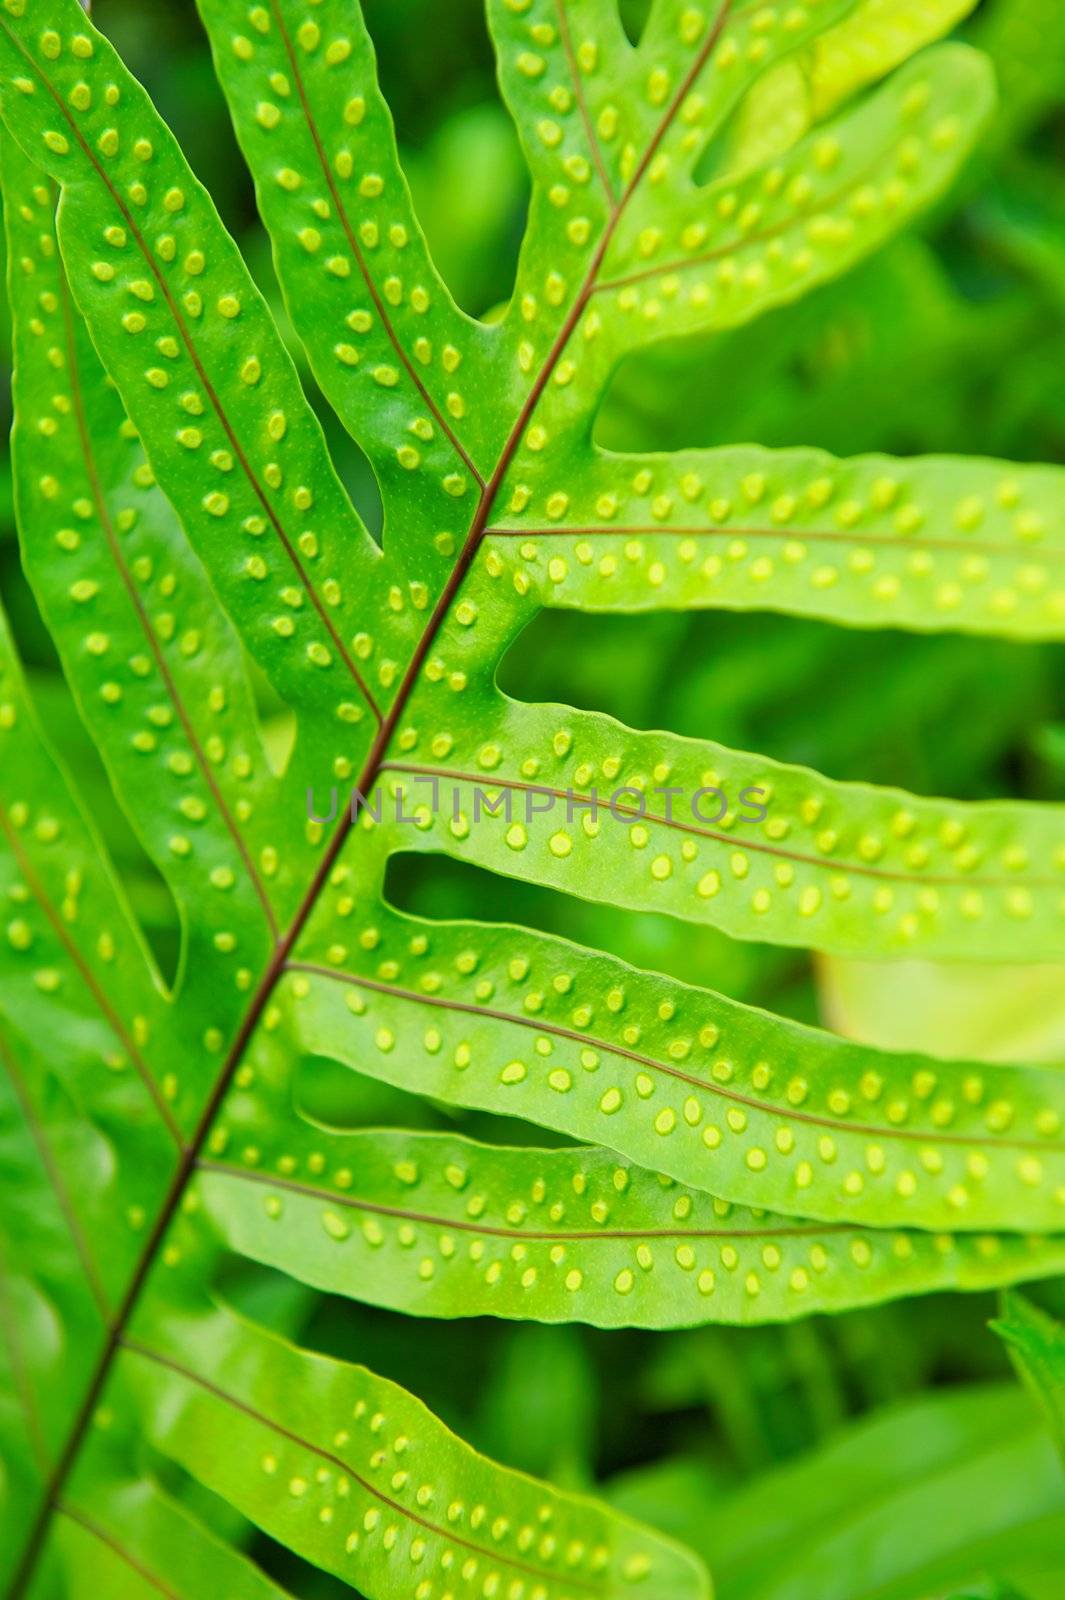 A vibrant green spotted leaf from a plant in Hawaii